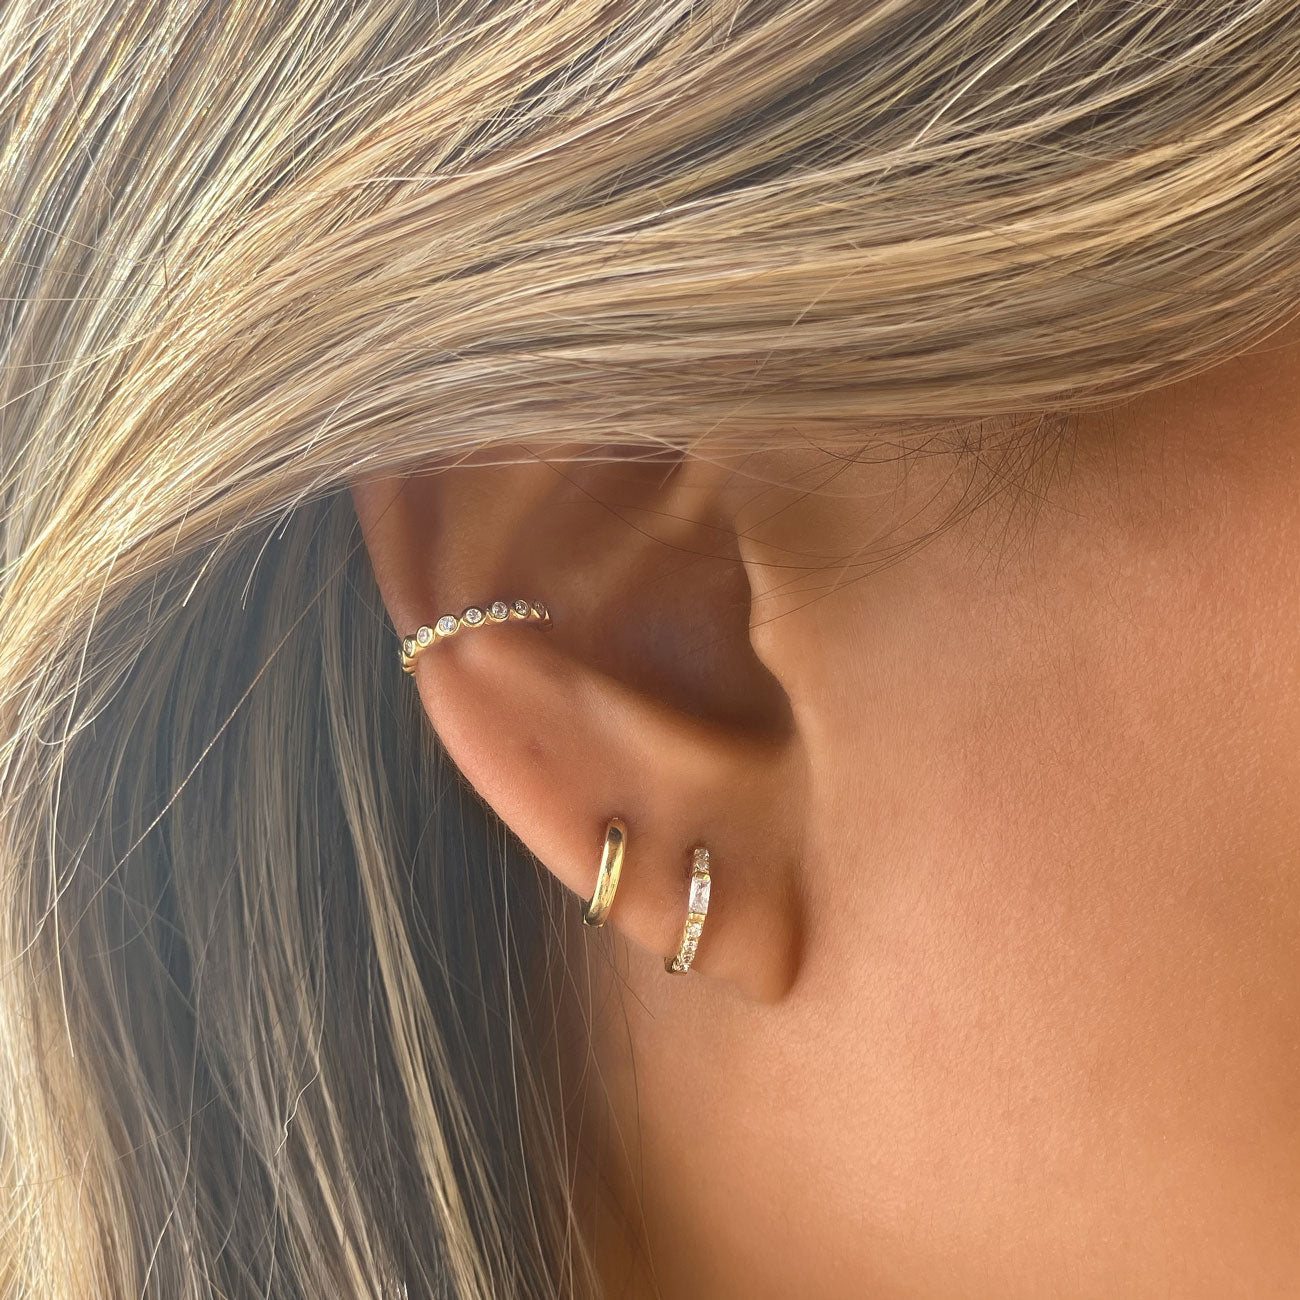 Gold huggie earrings paired with pave conch ear cuff